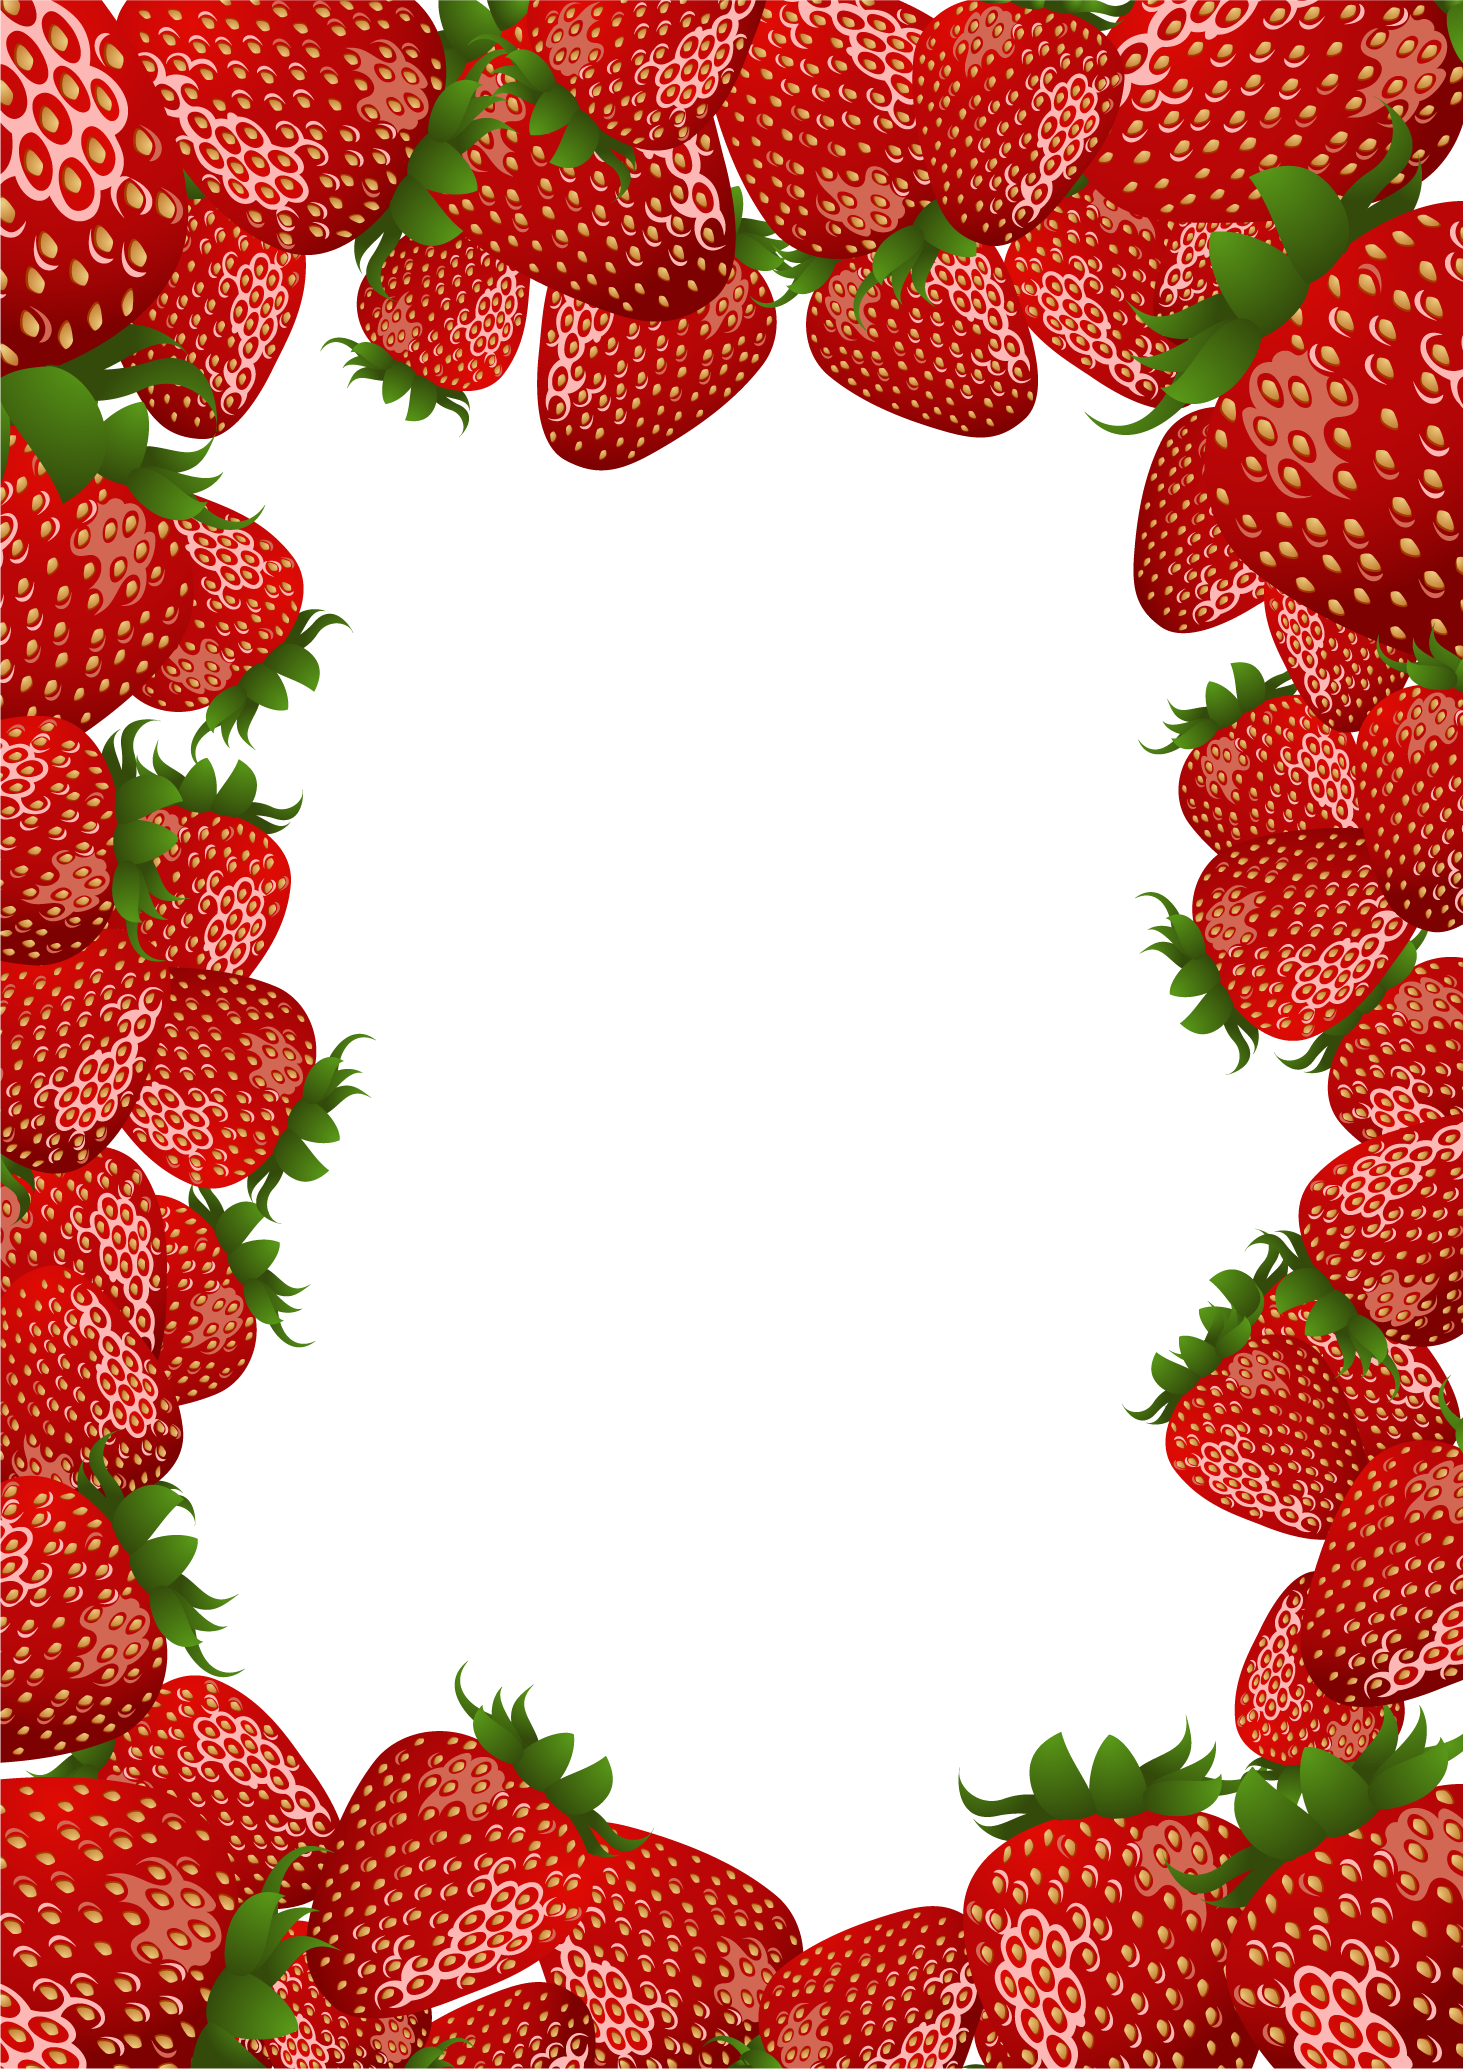 Strawberry clipart border free images